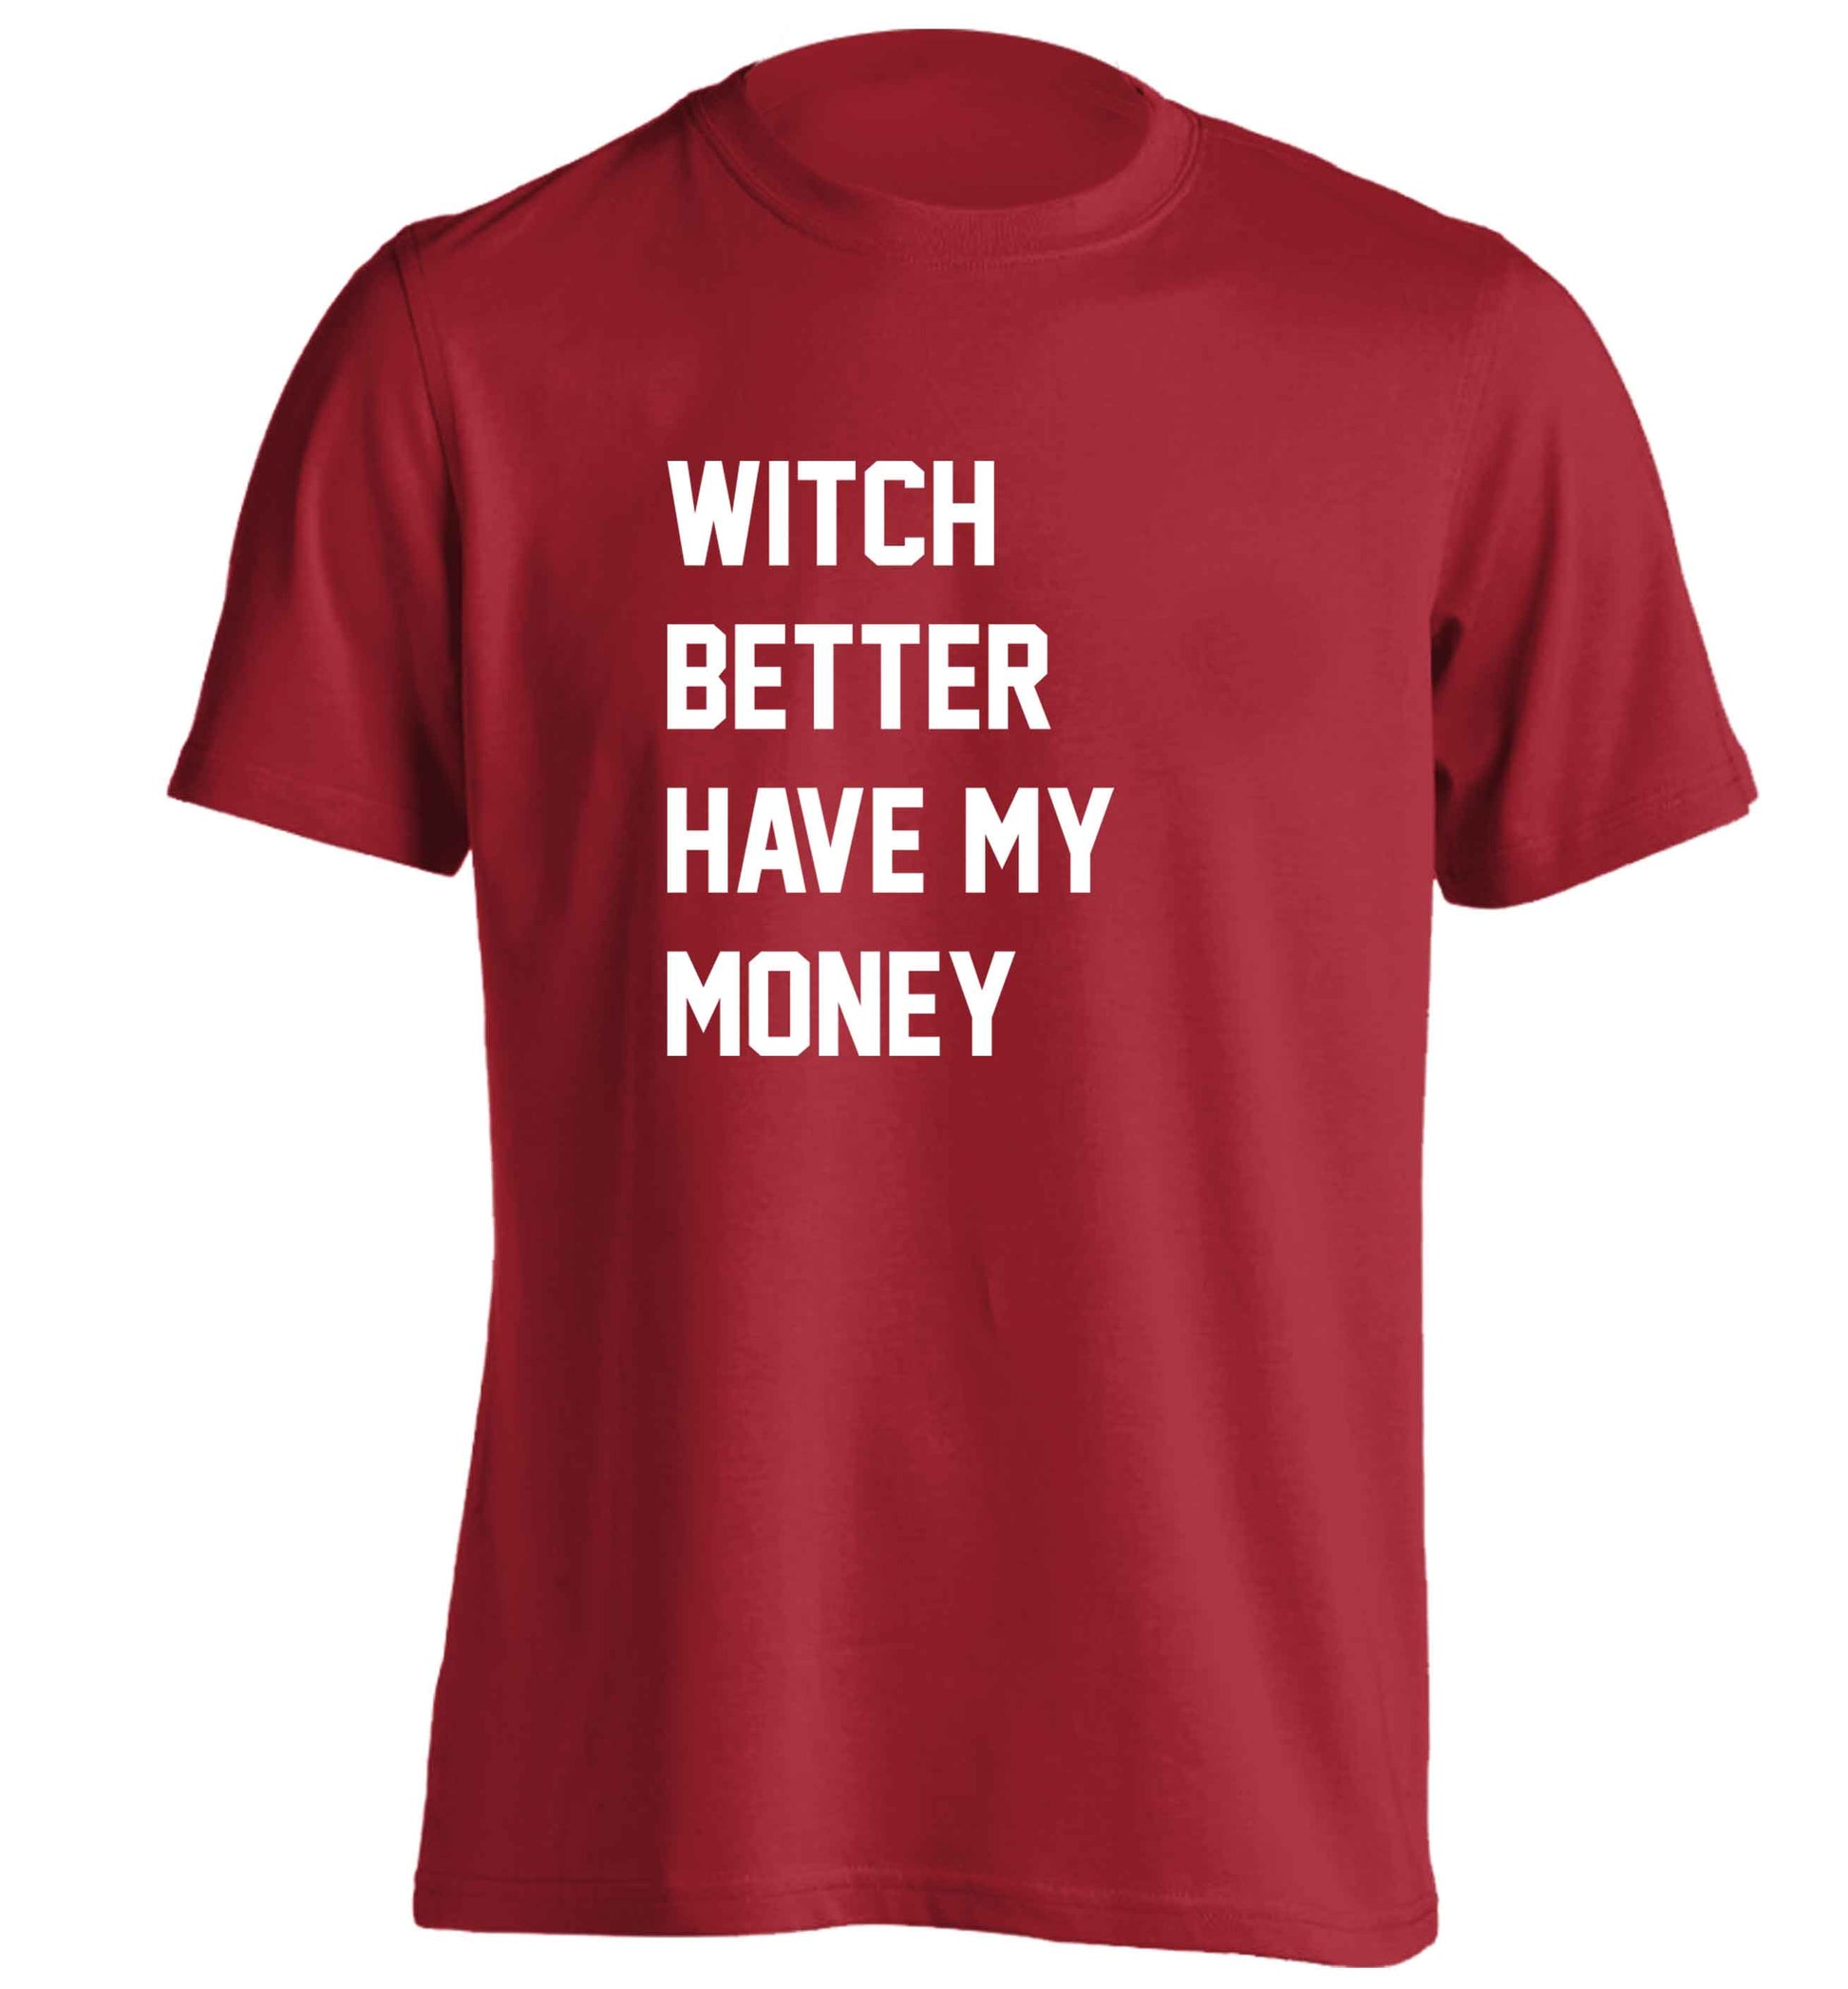 Witch better have my money adults unisex red Tshirt 2XL